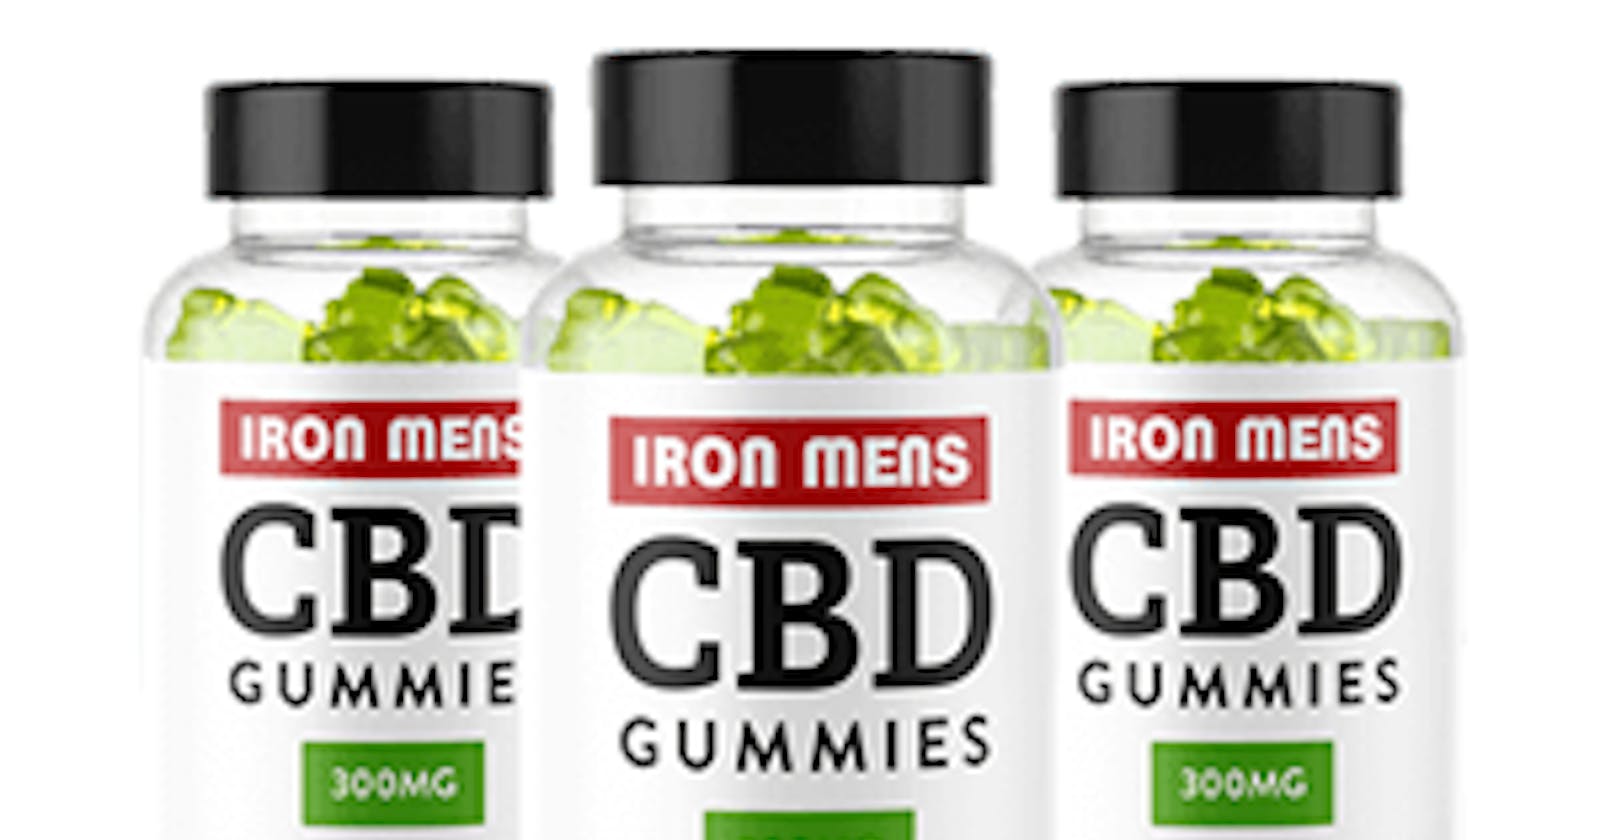 Iron Mens CBD Gummies (Scam or Legit) Here’s What Experts Say about Iron Mens CBD?